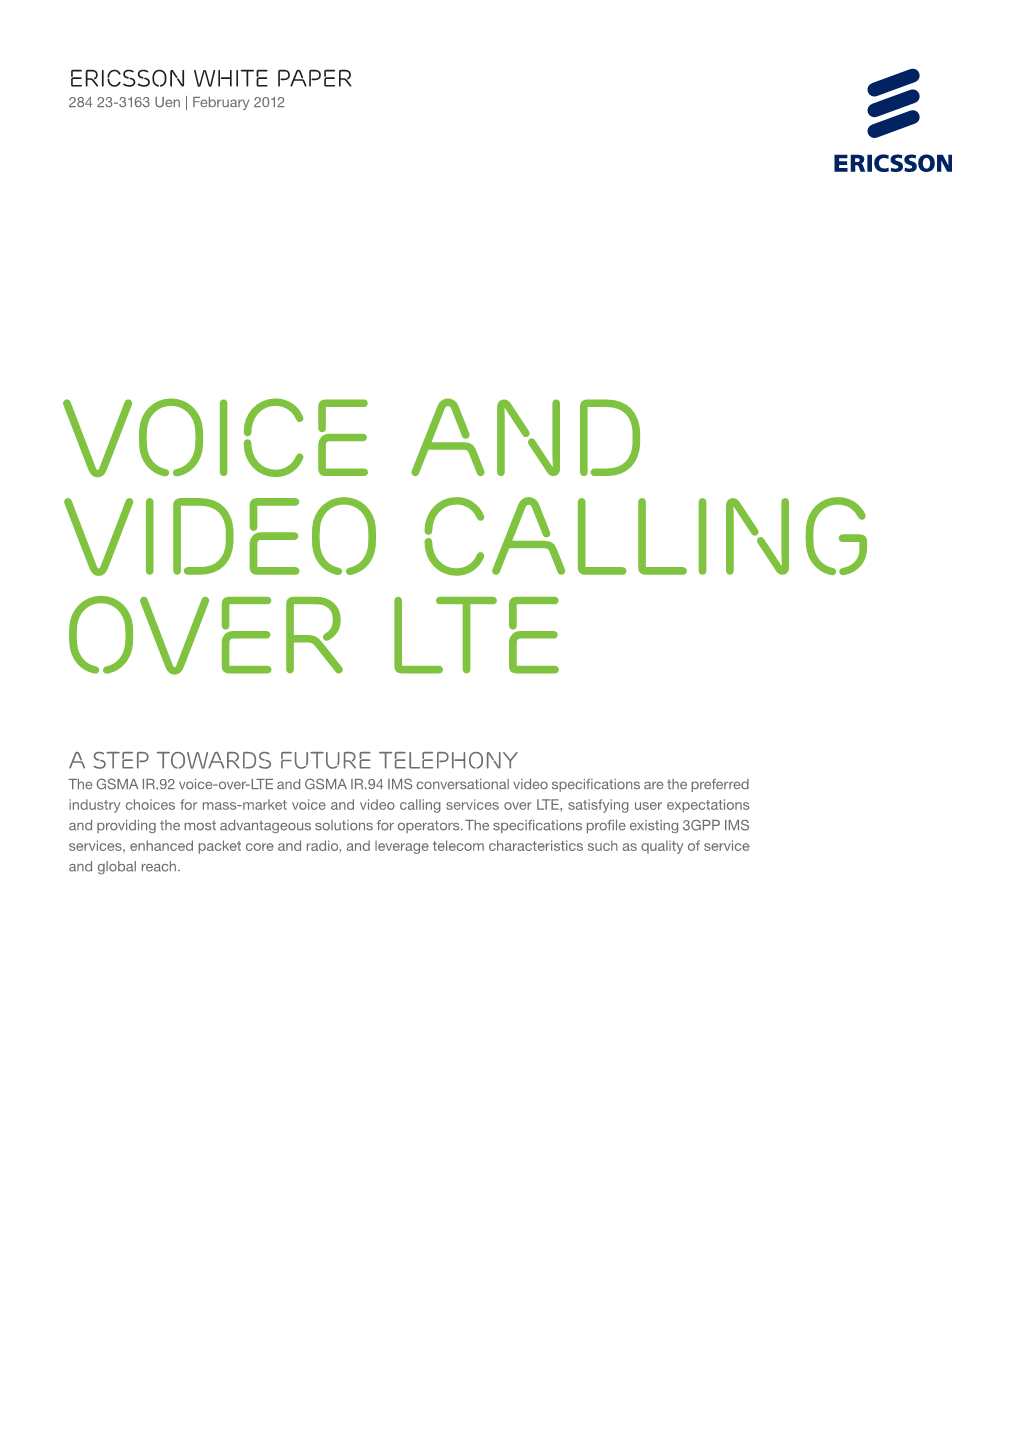 Voice and Video Calling Over LTE